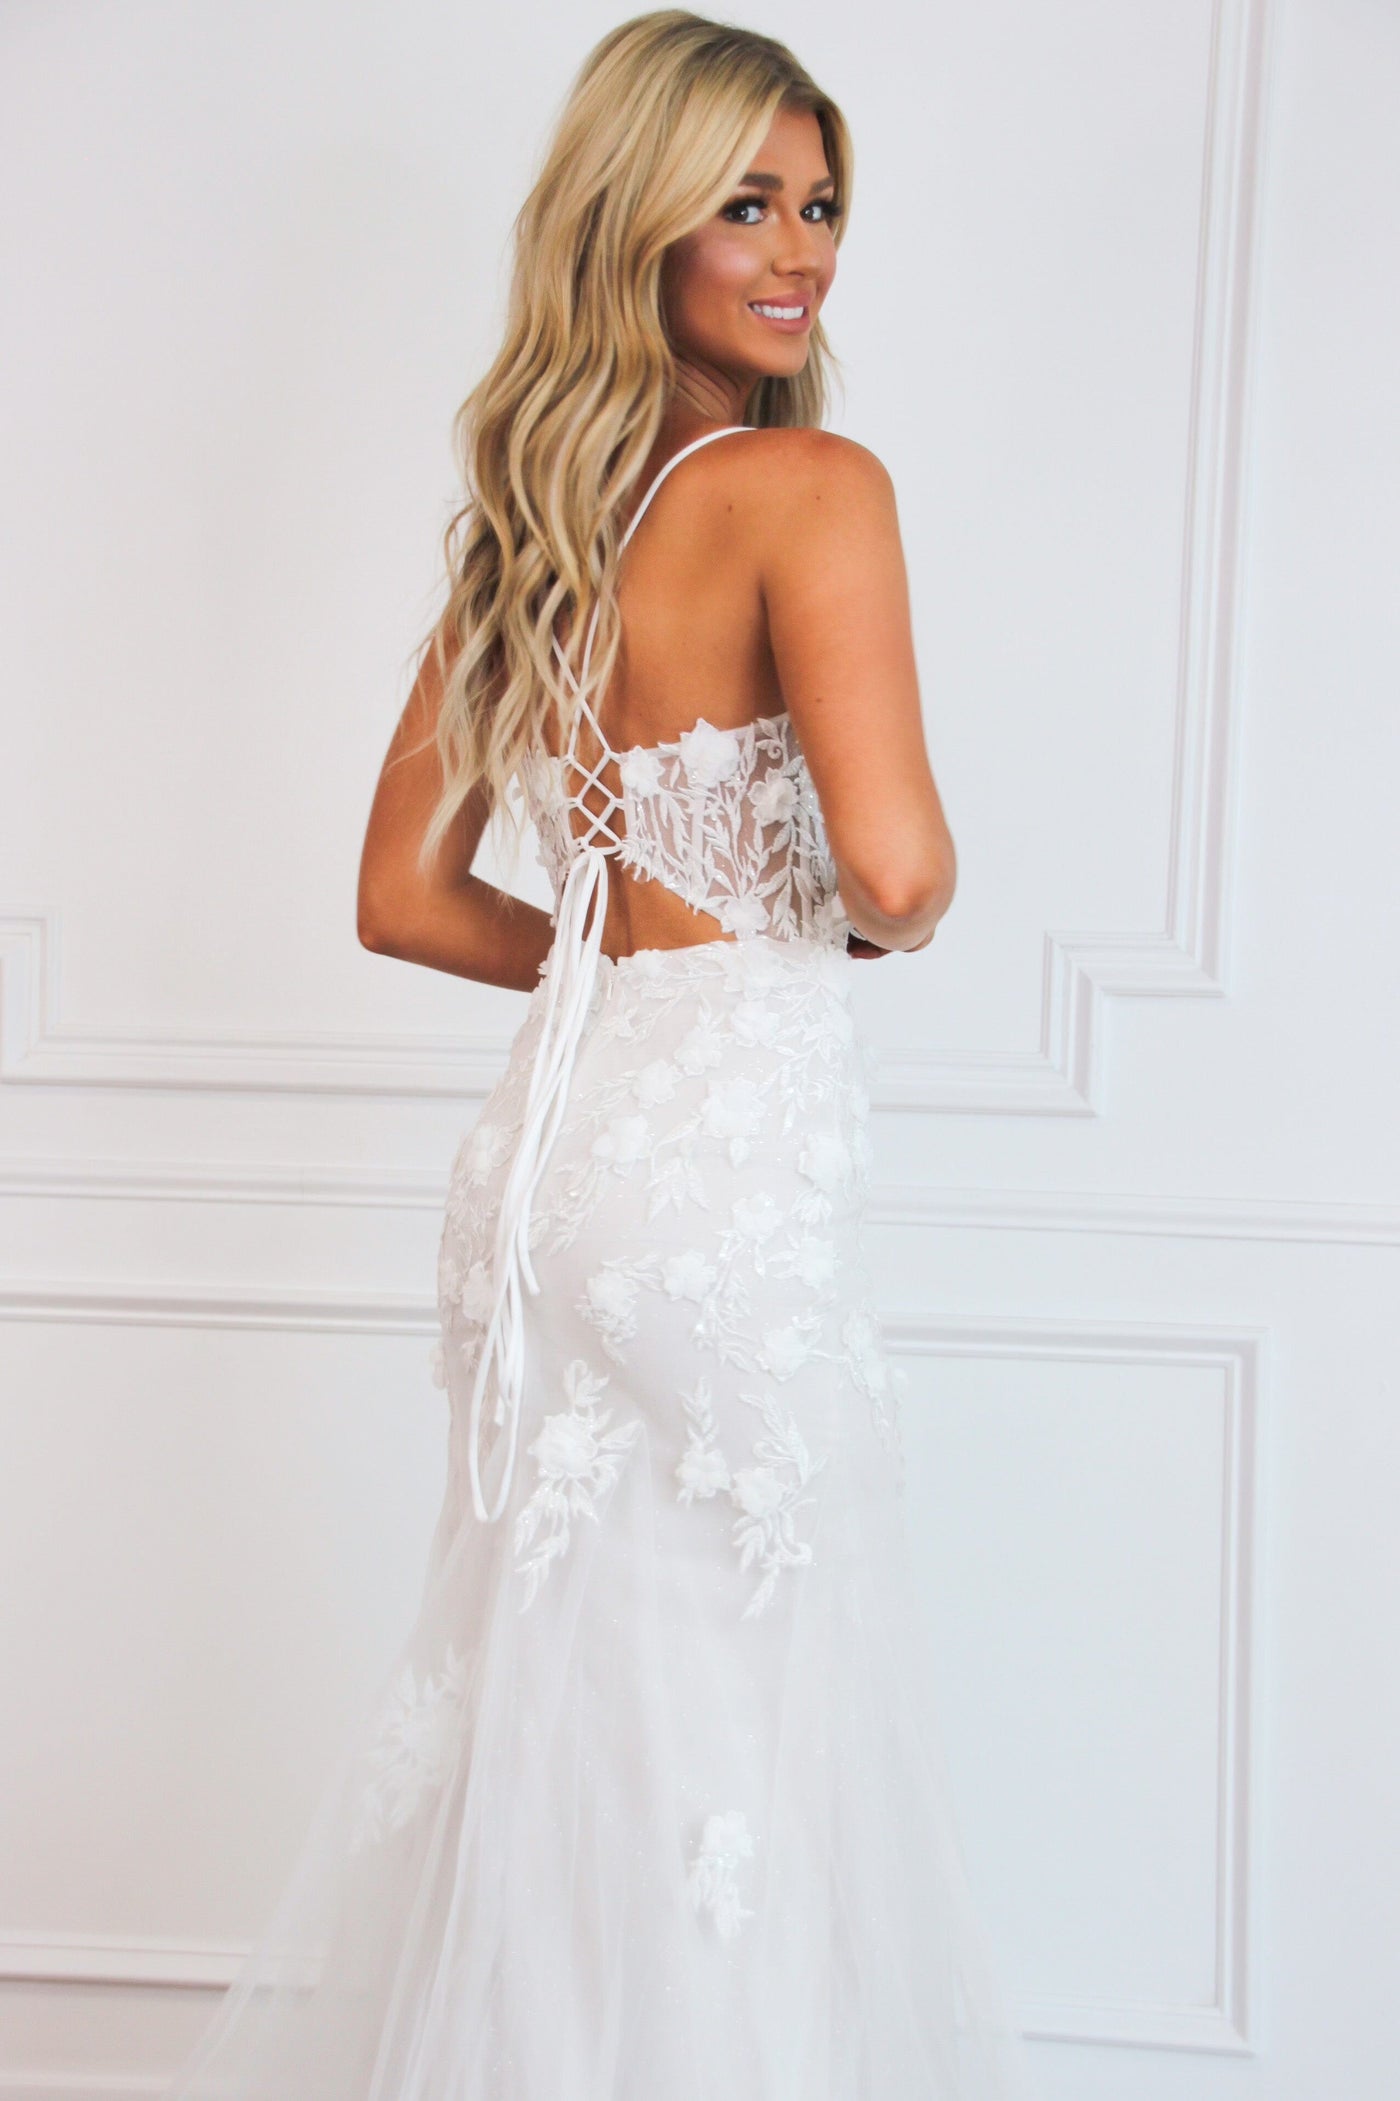 Eden Floral Applique Sparkly Mermaid Wedding Dress: Off White/Nude - Bella and Bloom Boutique